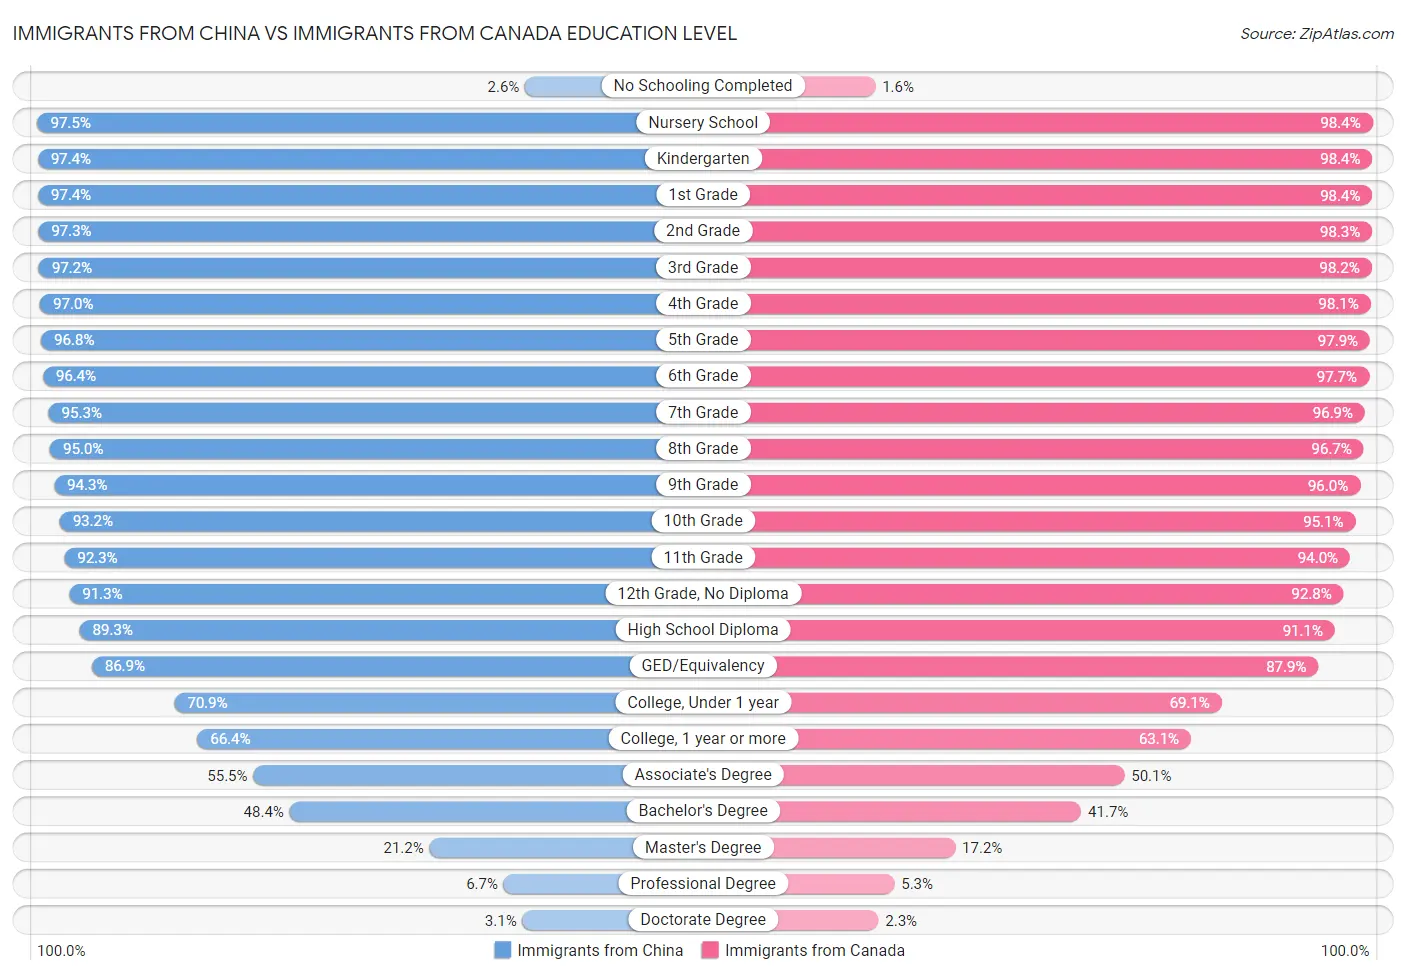 Immigrants from China vs Immigrants from Canada Education Level